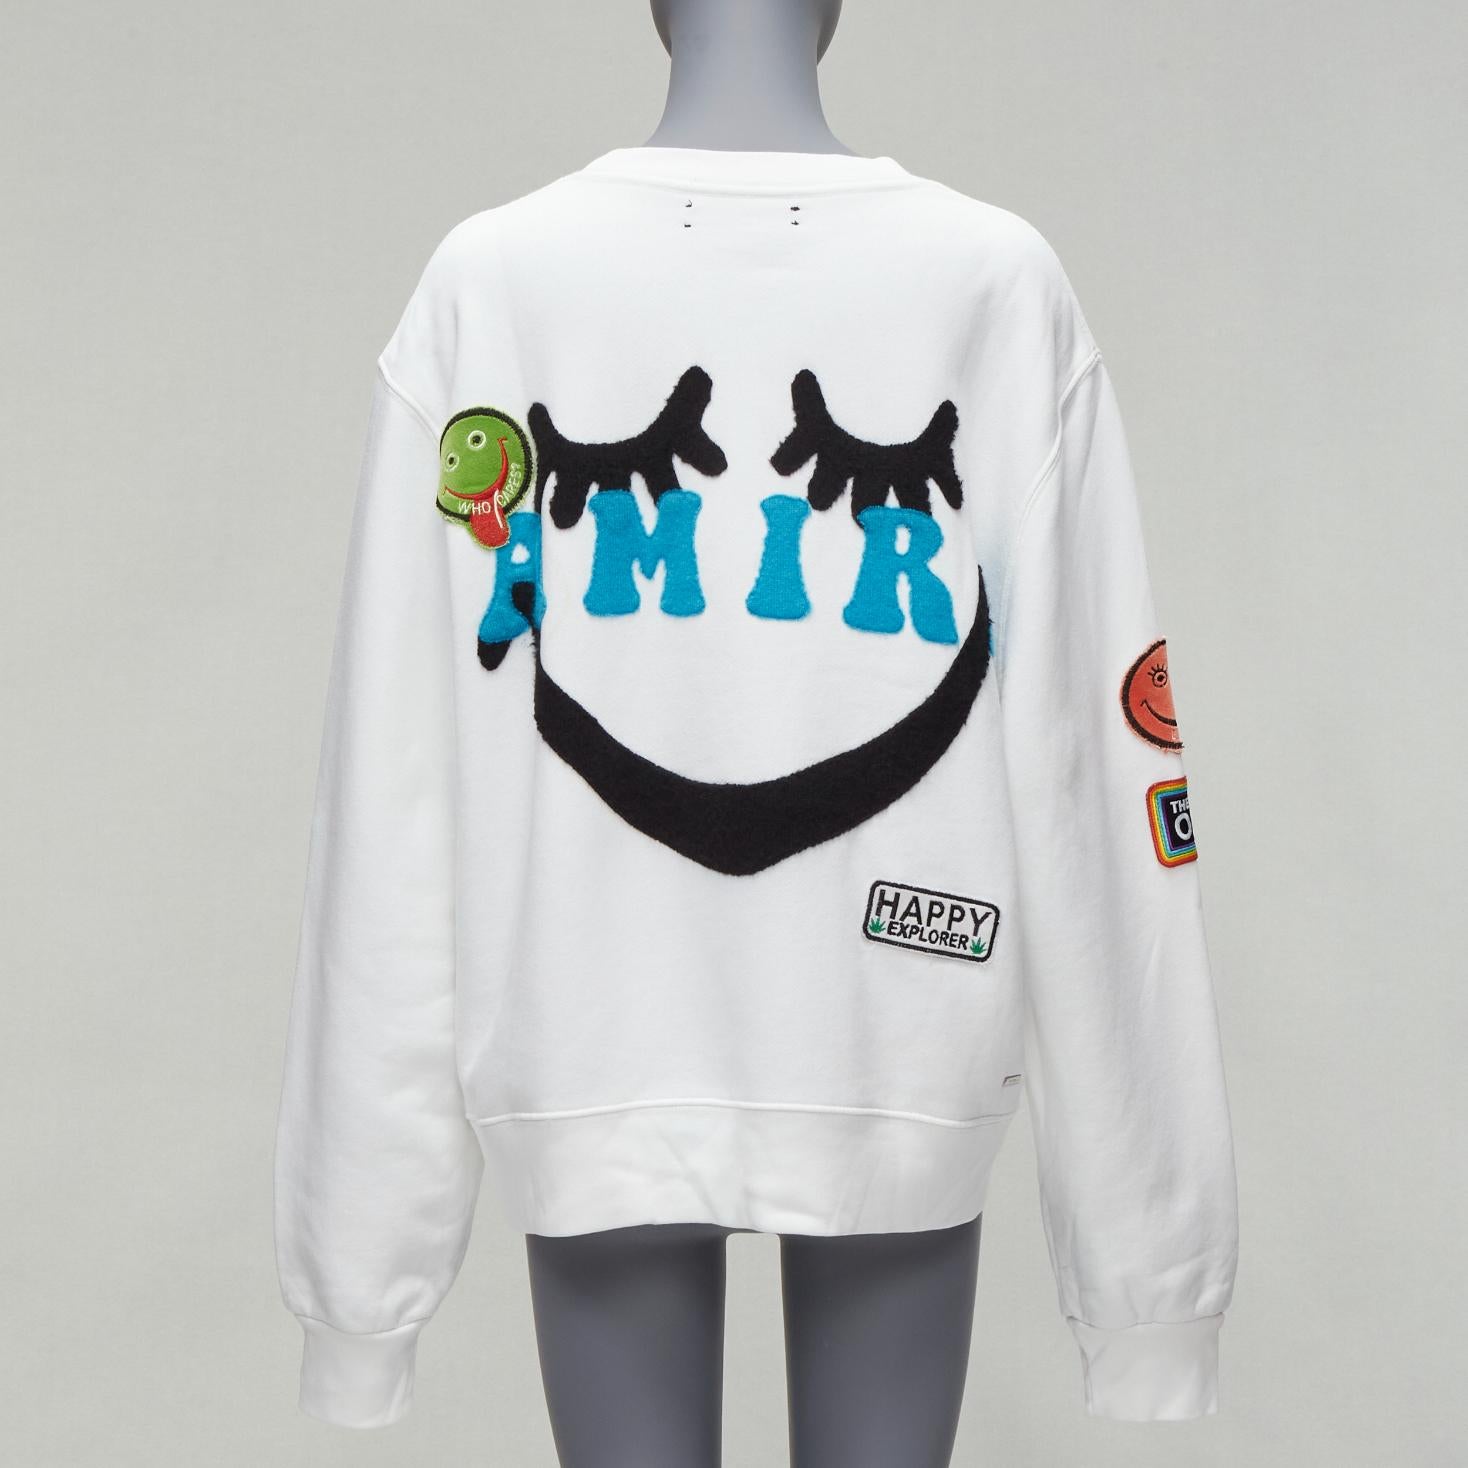 AMIRI 2021 A Love Movement healthy body knit badge smiley face white hoodie L
Reference: JYLM/A00039
Brand: Amiri
Collection: Spring 2021
Material: Cotton
Color: White, Blue
Pattern: Solid
Closure: Pullover
Extra Details: AMIRI logo and smiley face